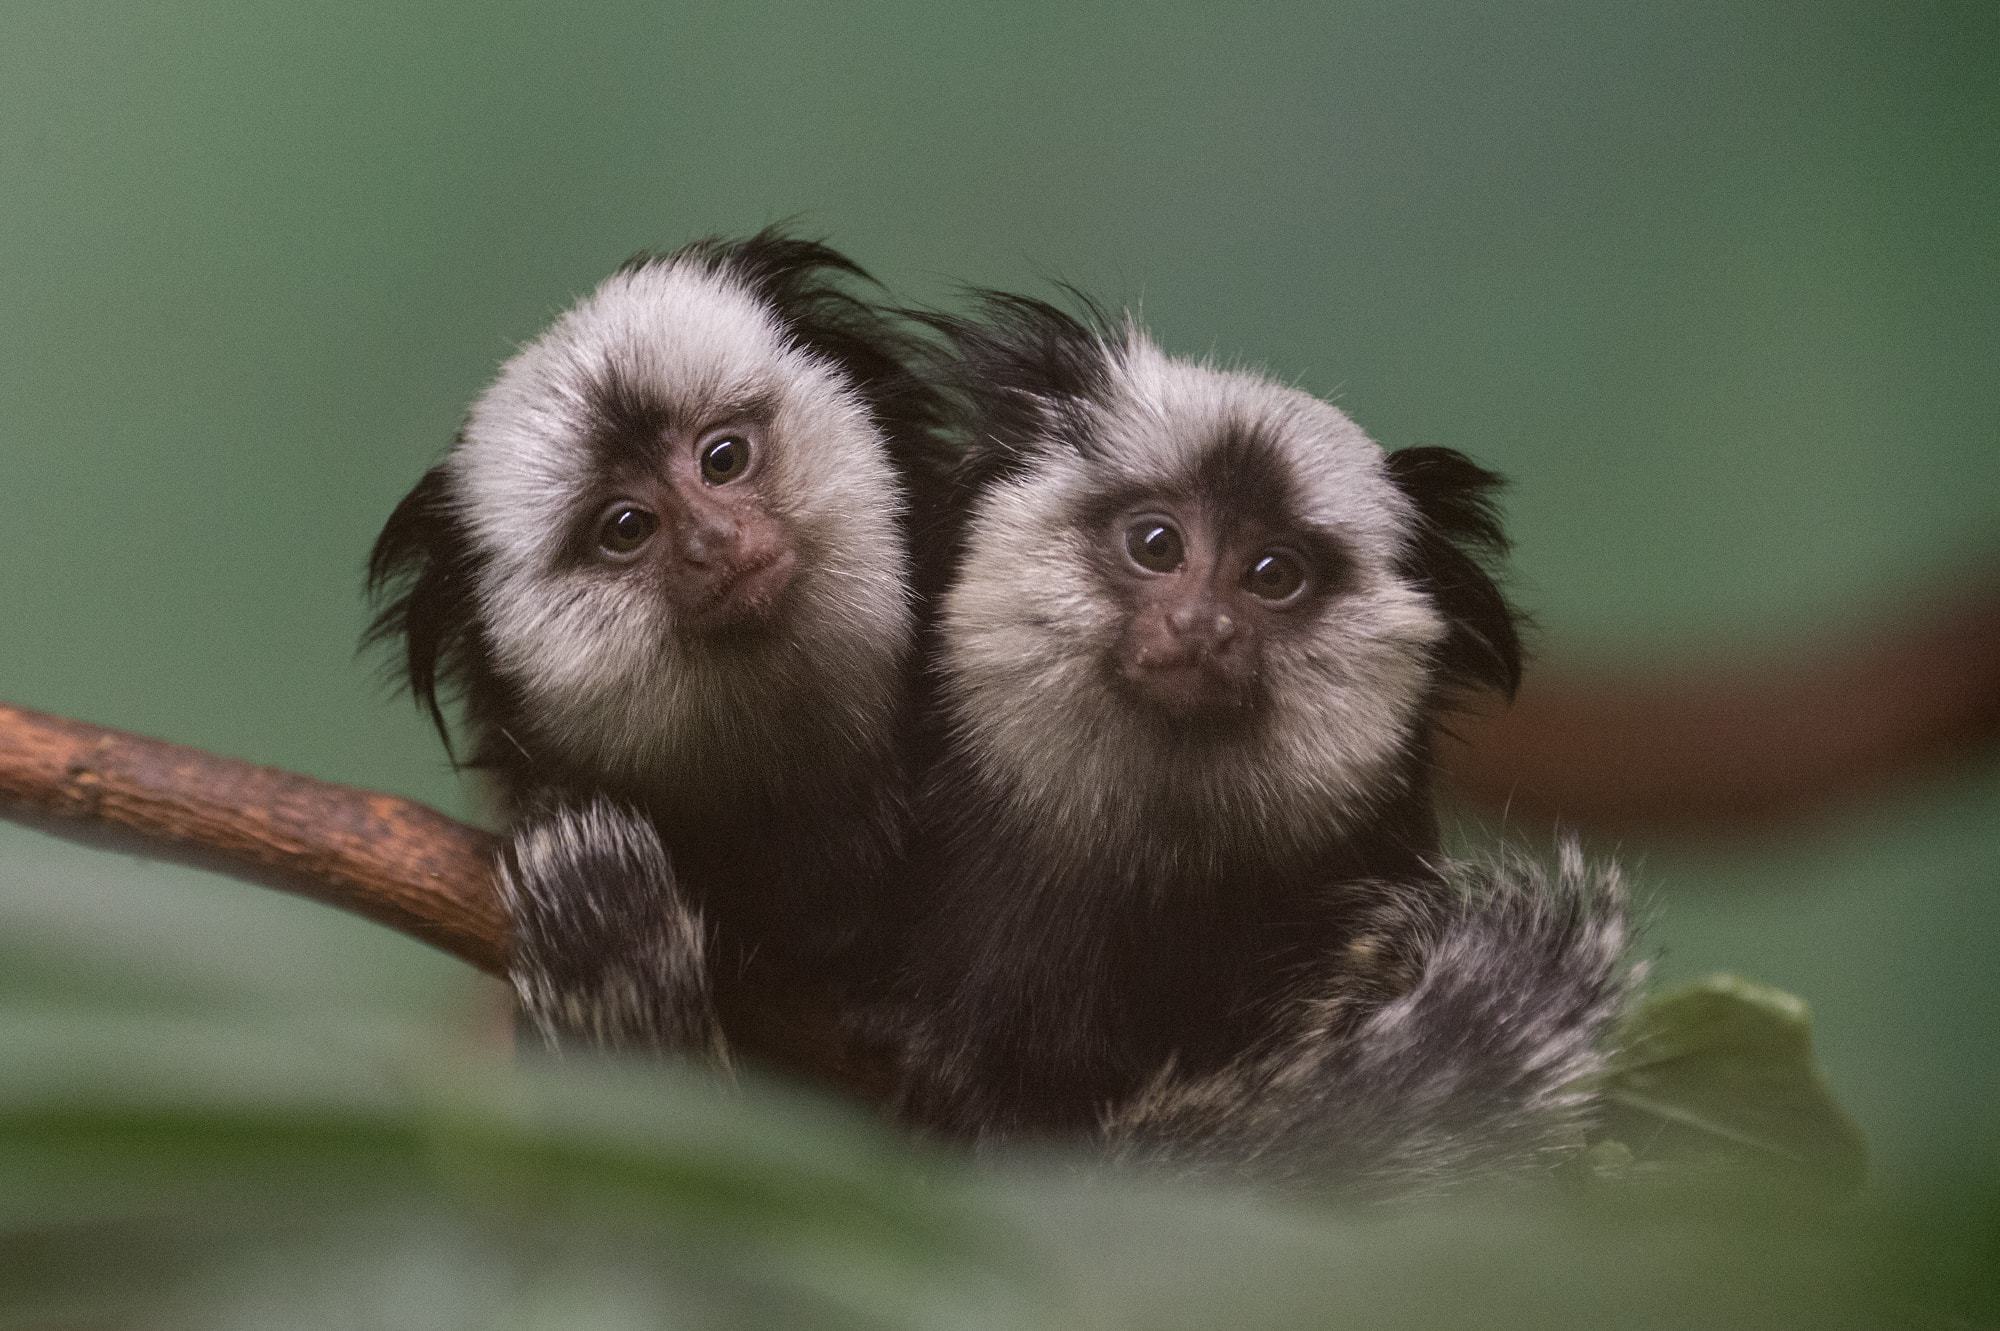 Marmoset monkey Wallpapers Images Photos Pictures Backgrounds